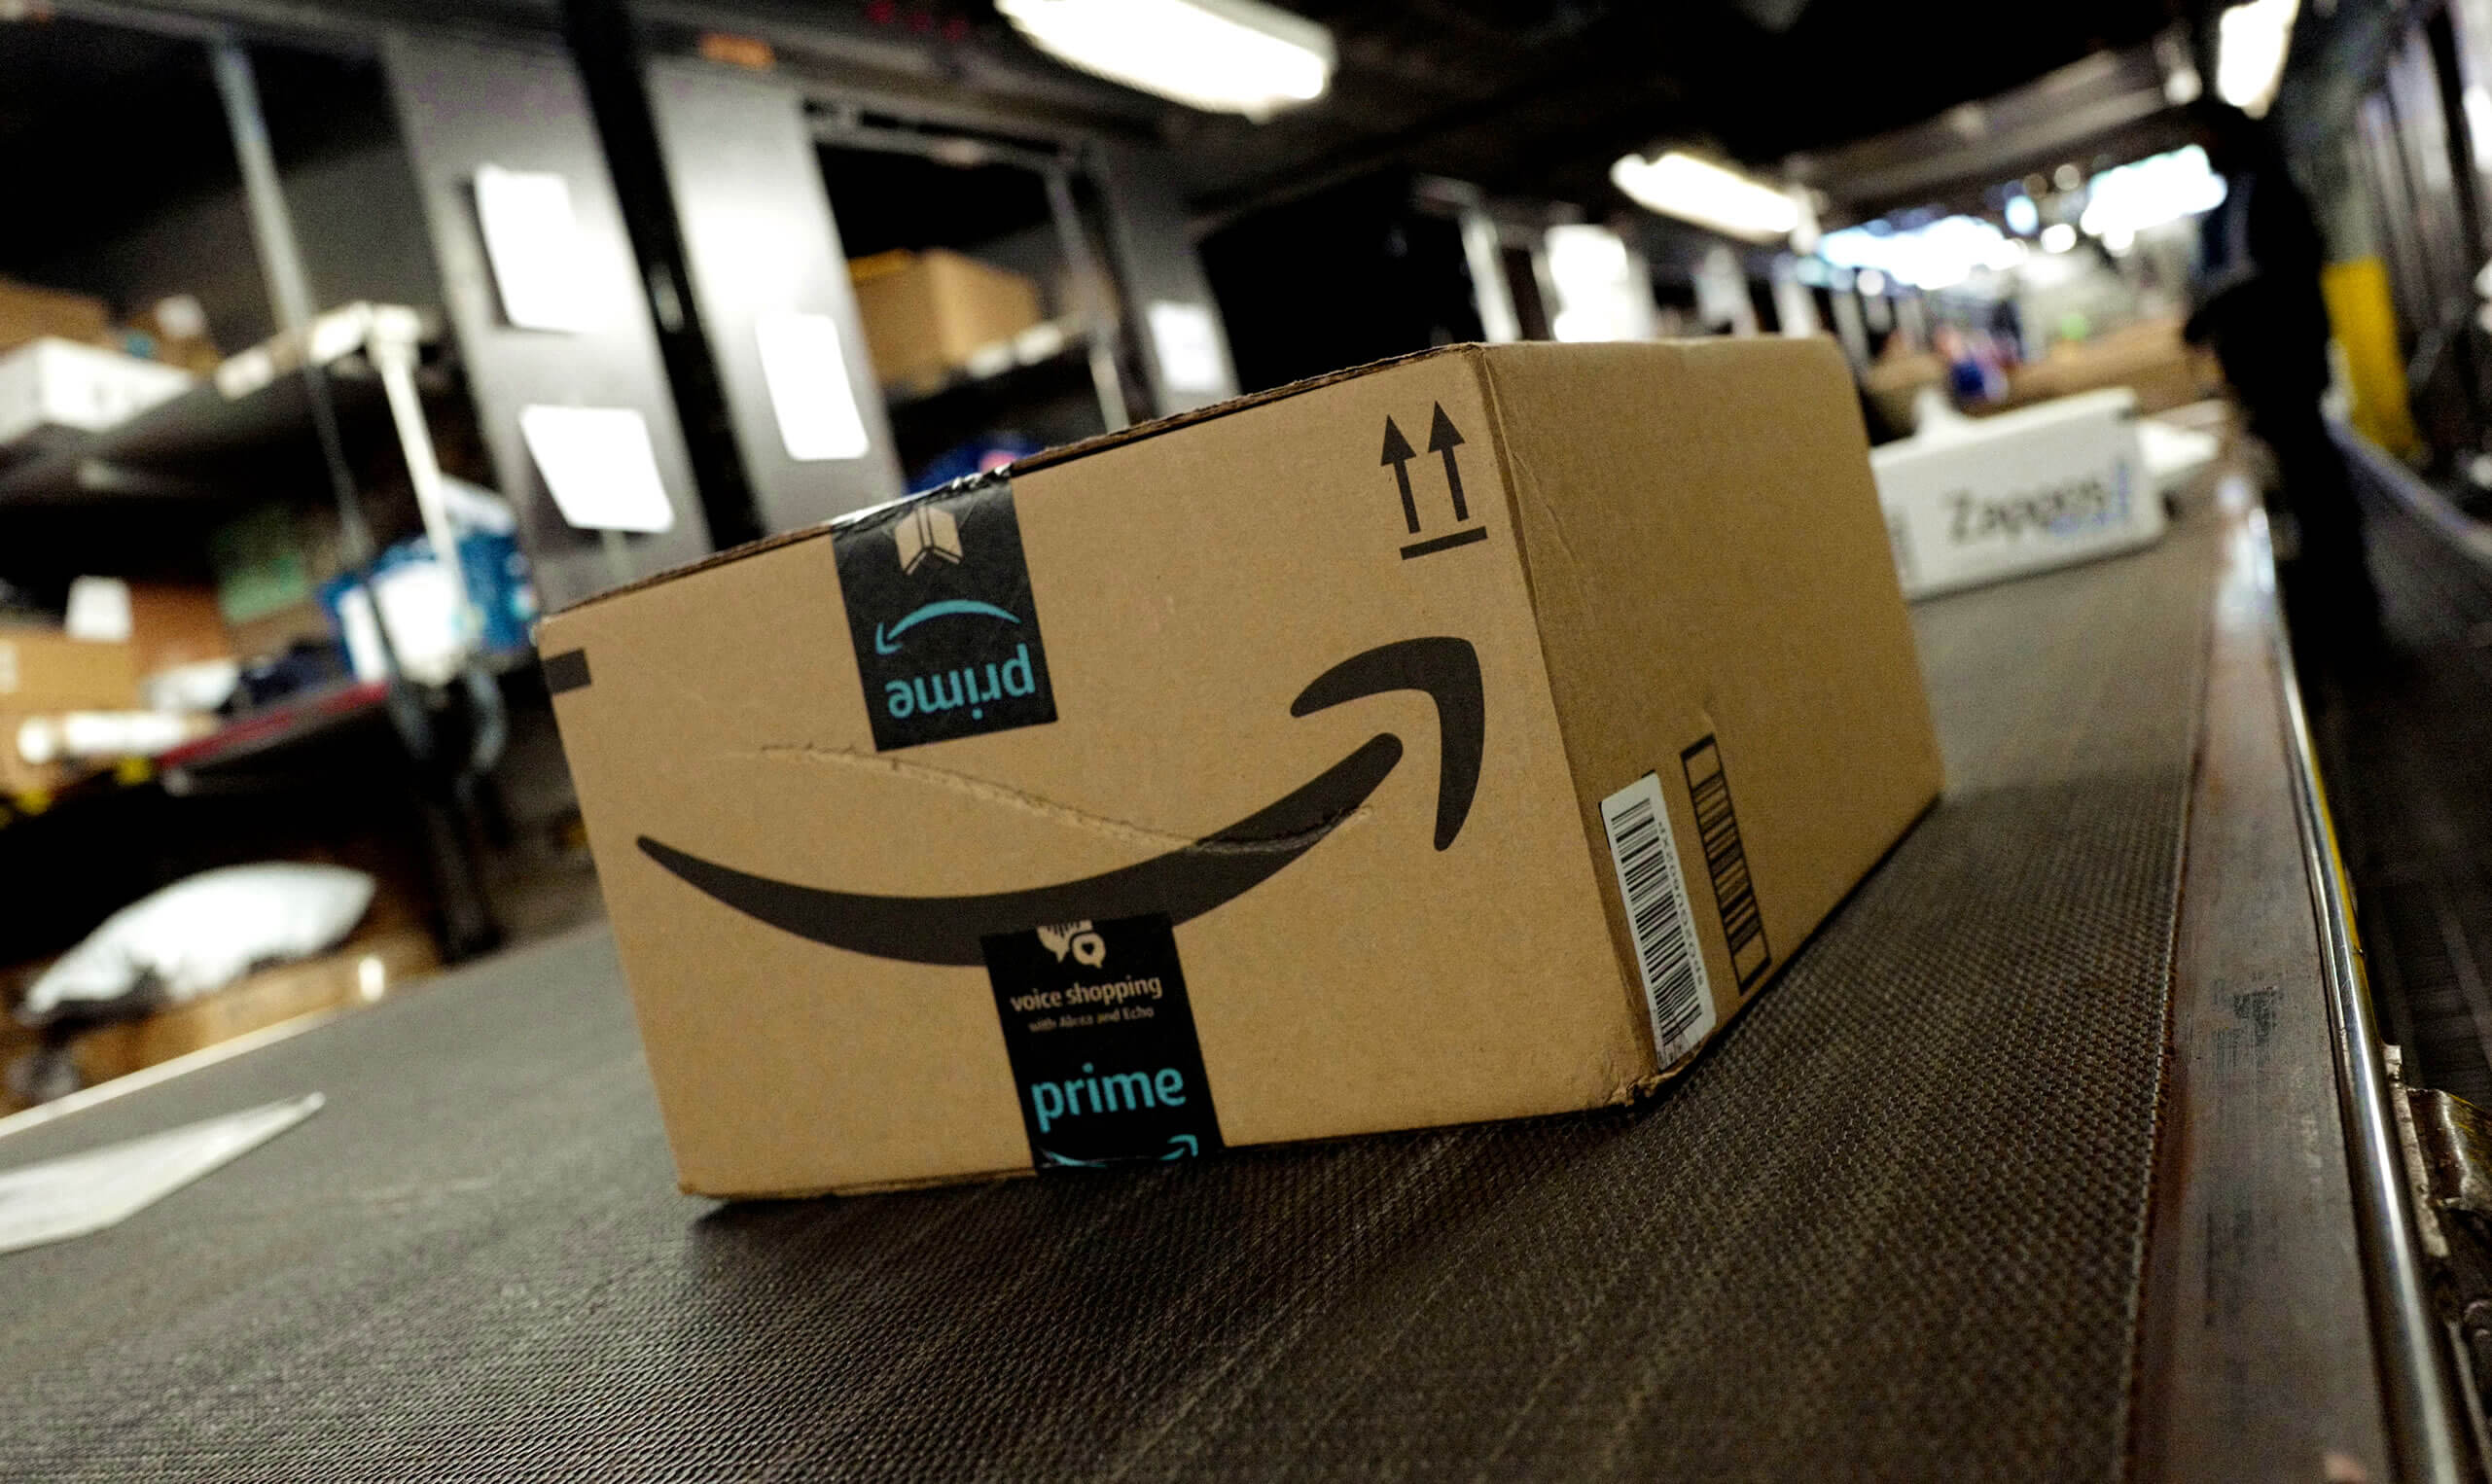 Some Amazon Prime deliveries are facing month-long delays